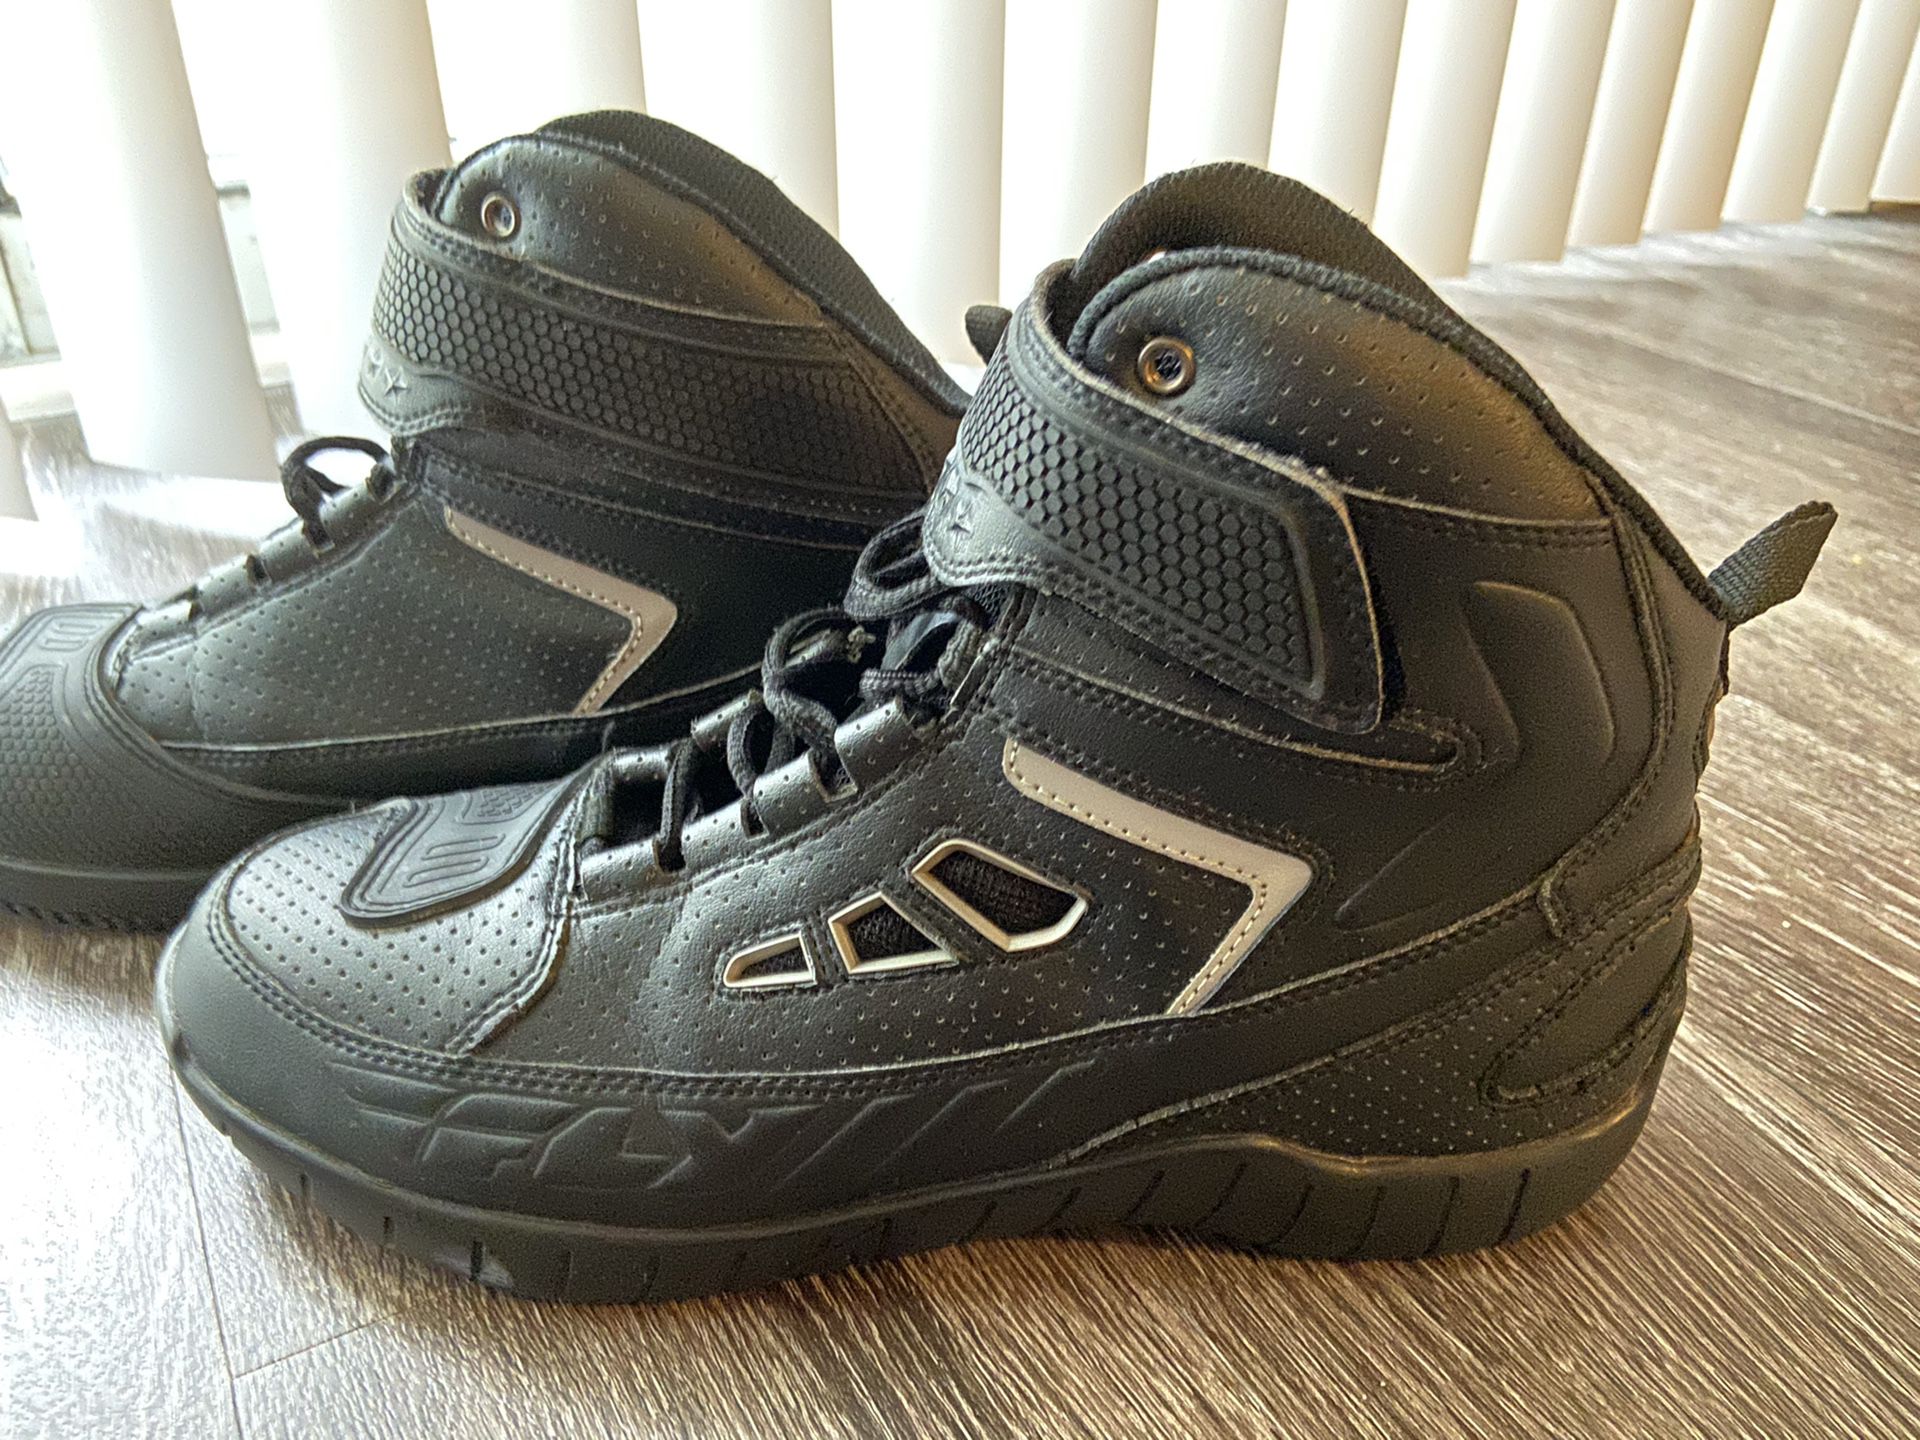 Fly motorcycle riding shoes size 11